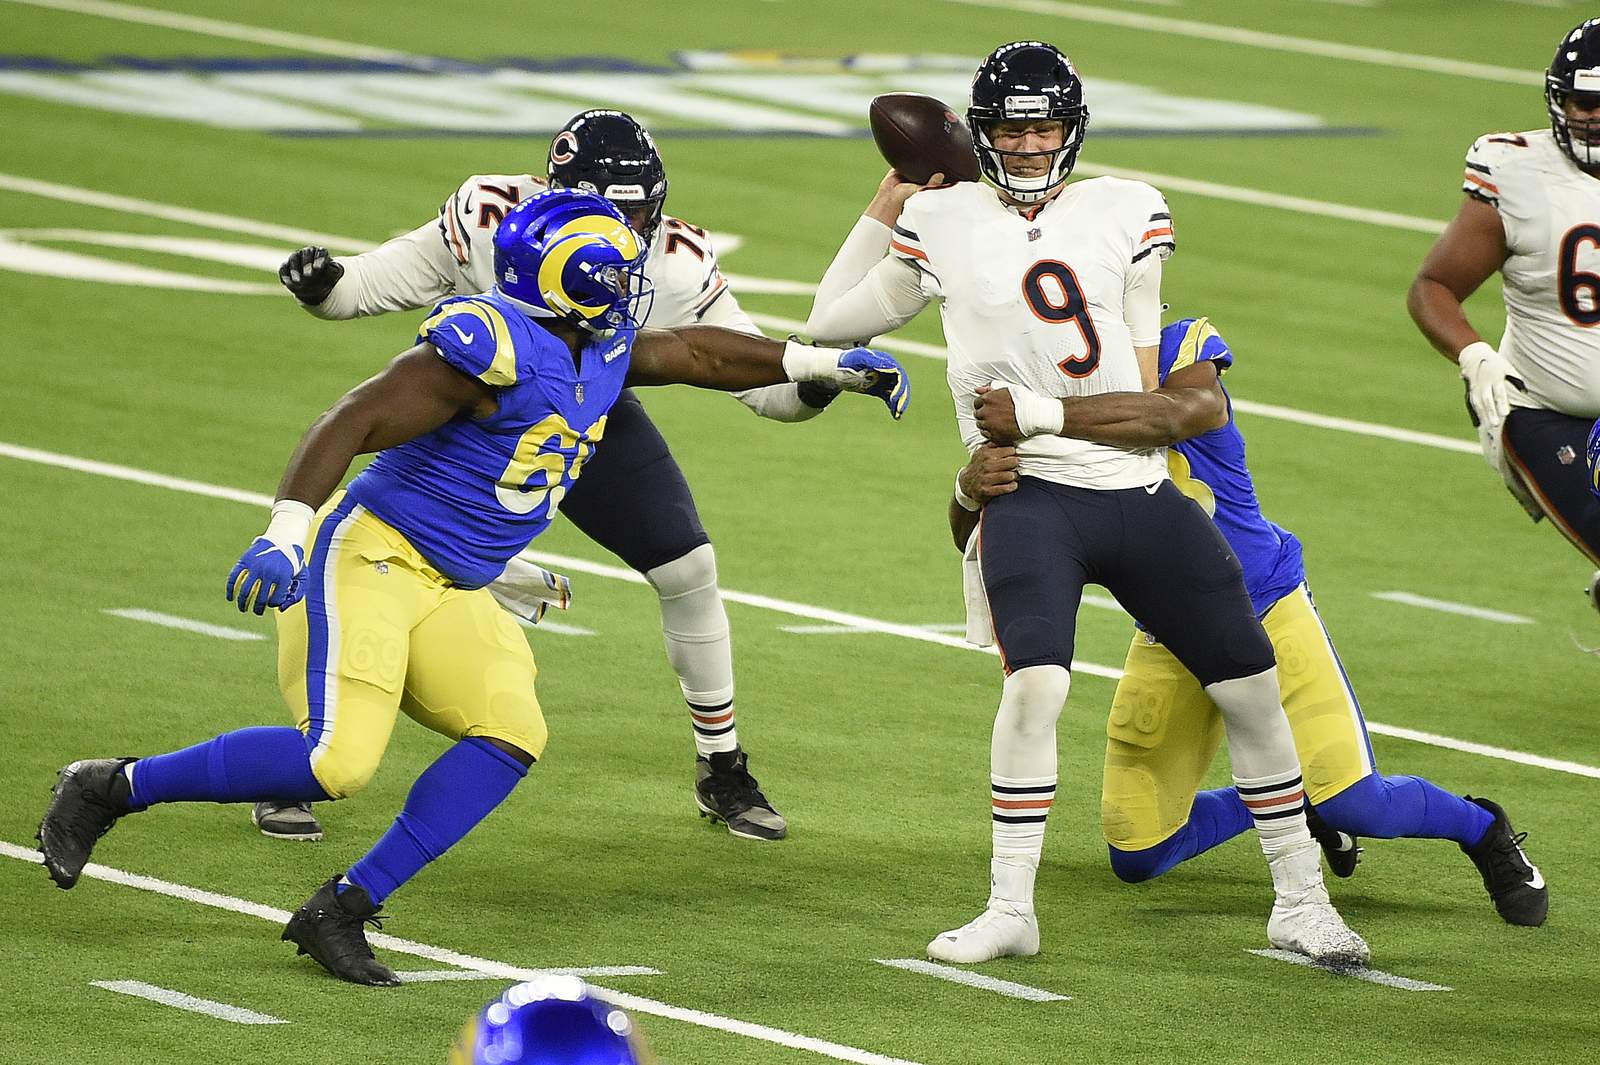 Bears' offense seeks answers after poor showing against Rams